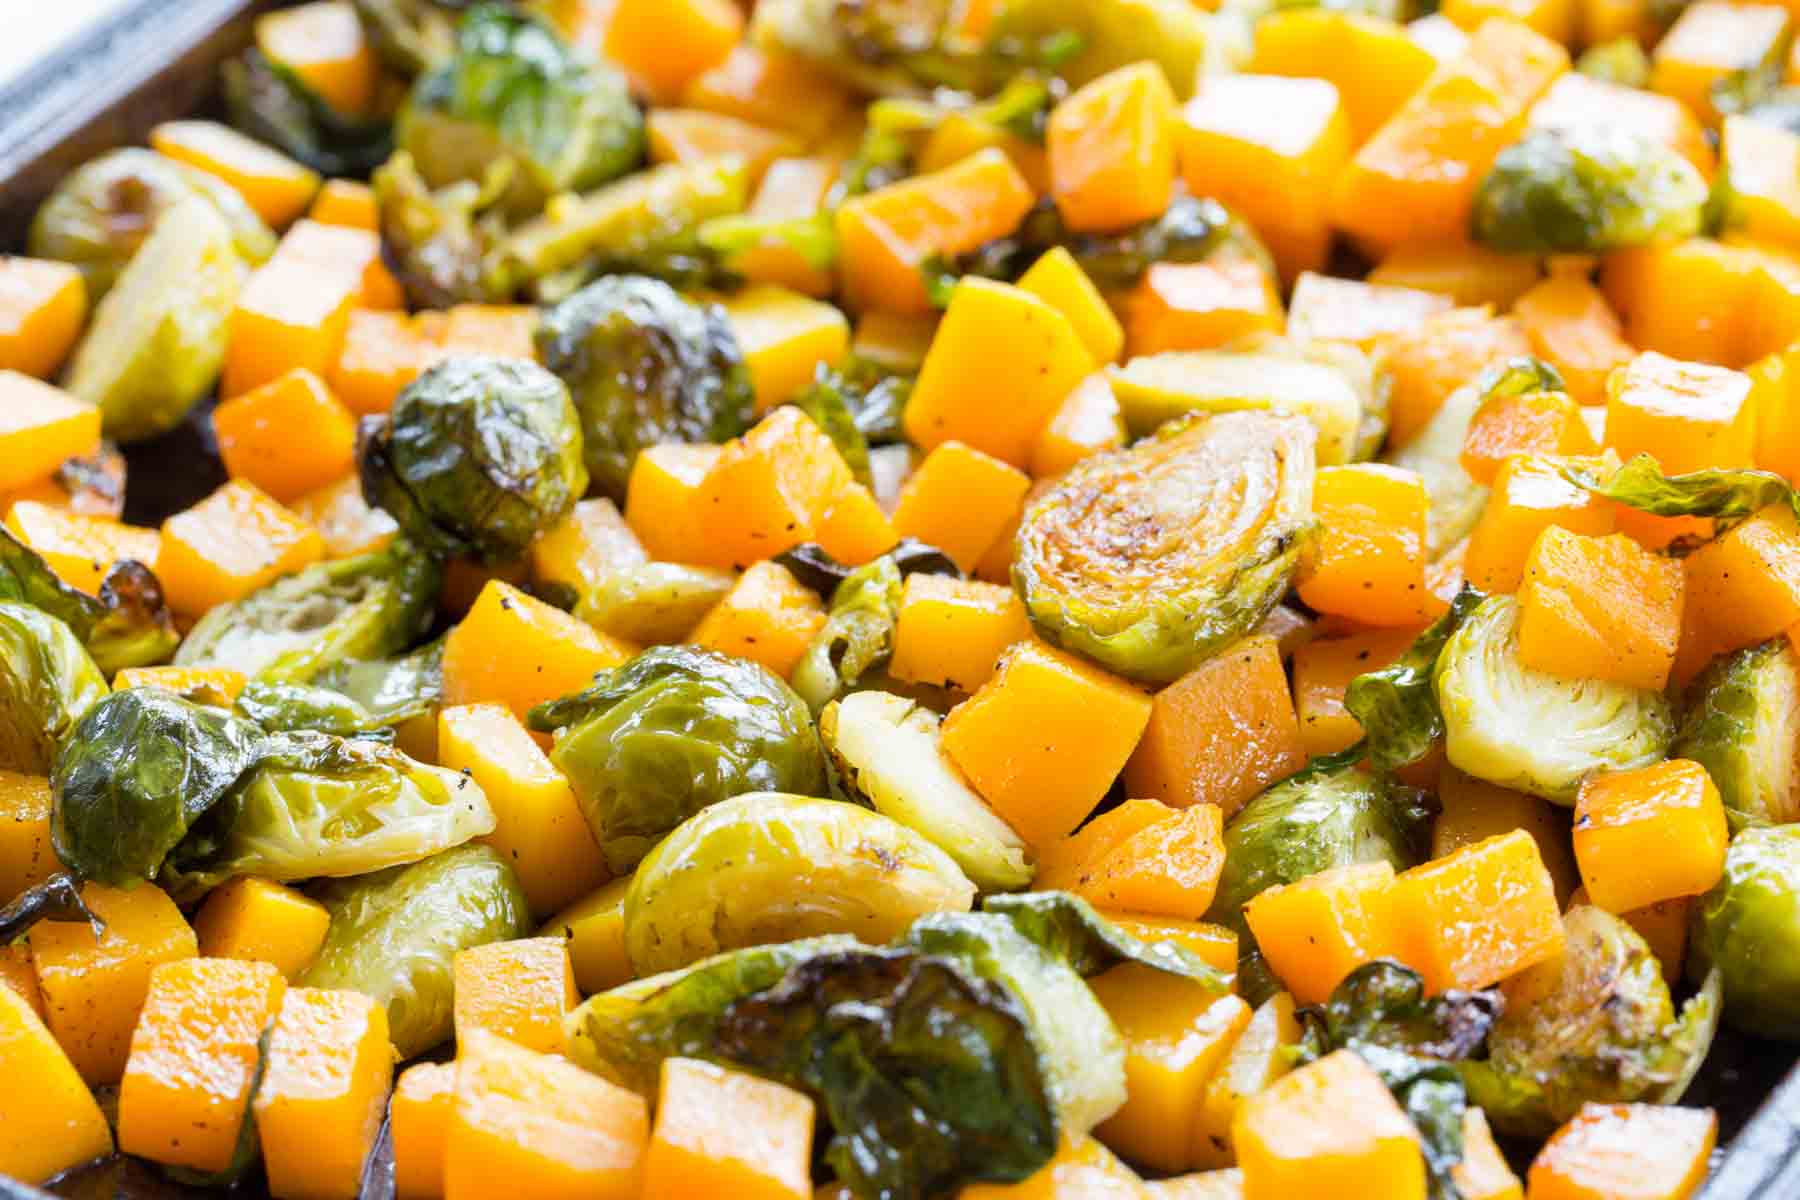 Maple Brussel Sprouts and Butternut Squash is a simple four ingredient side dish